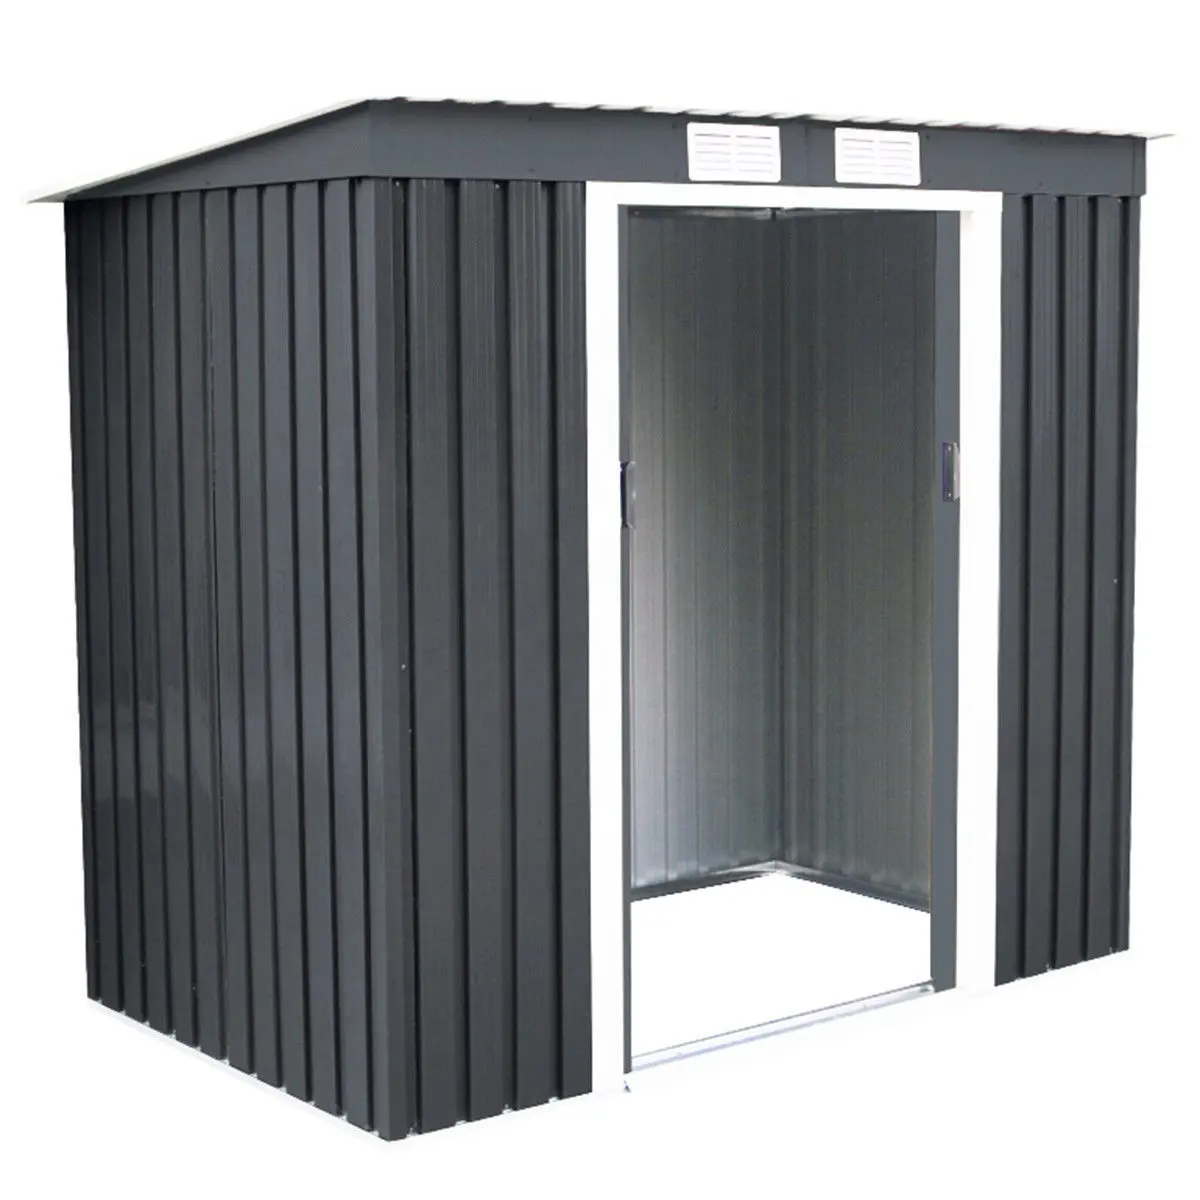 Custom Size Outdoor Storage Shed Outside Metal Garden Large Steel Anti-Corrosion Lockable Storage House Shed with Door